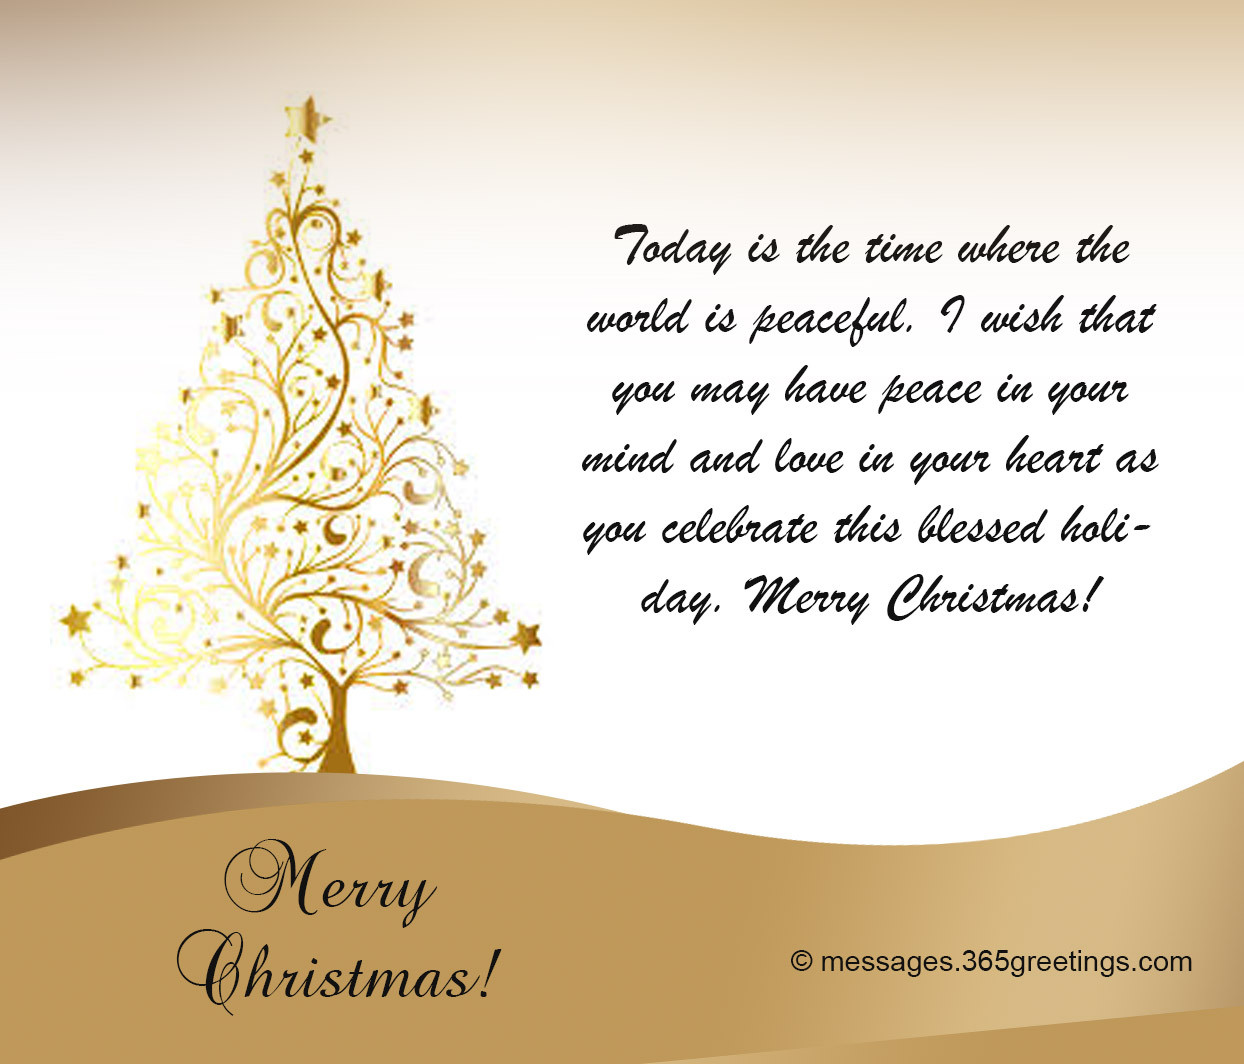 Quote For Christmas Card
 Best Christmas Card Sayings and Greetings 365greetings